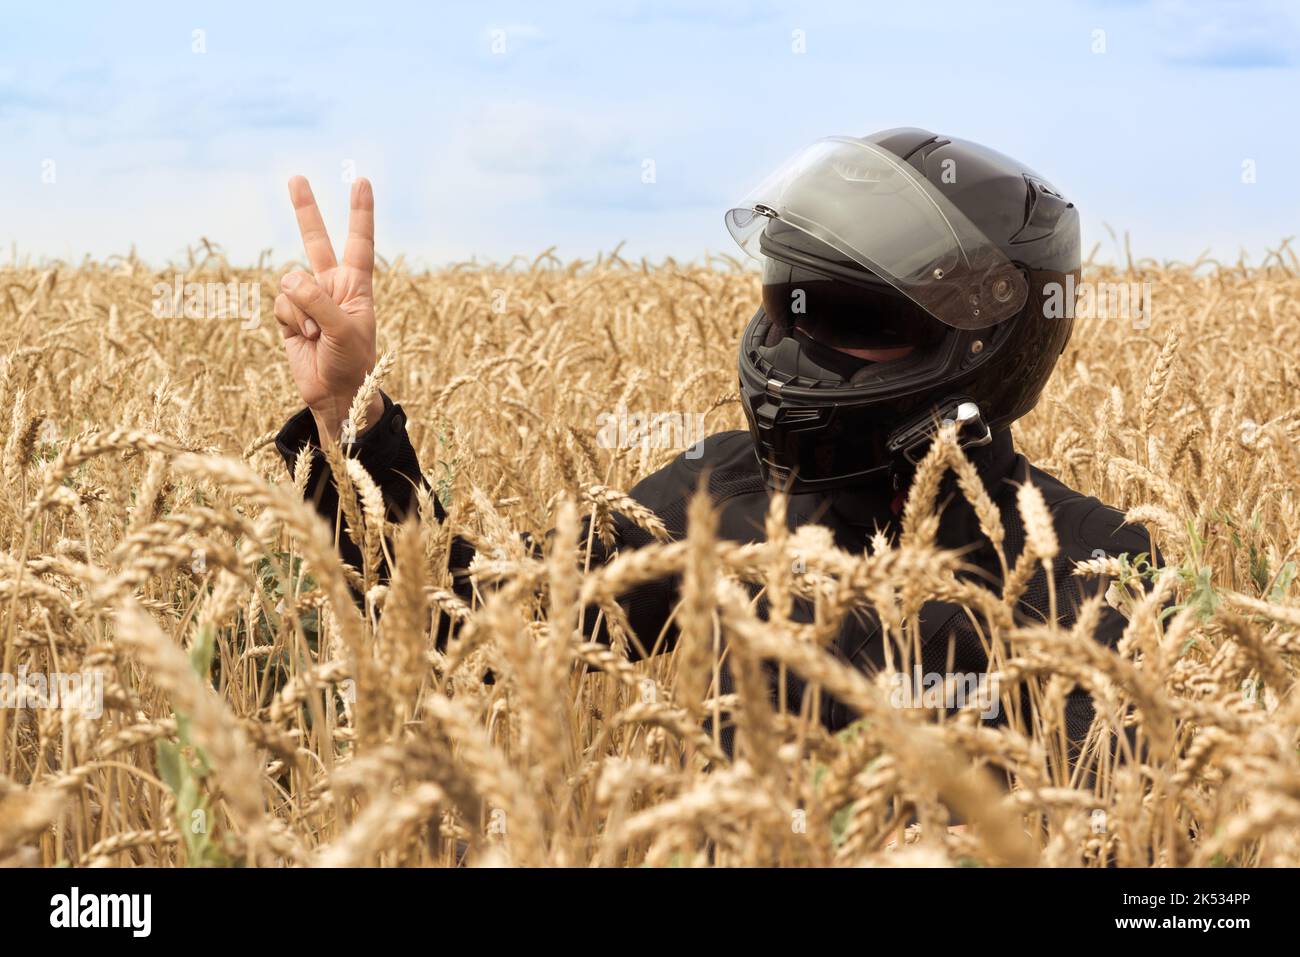 A male driver full motorcycle equipped. Outdoor wheat field and sky sunny day. Victory sign concept. Rider equipment Stock Photo